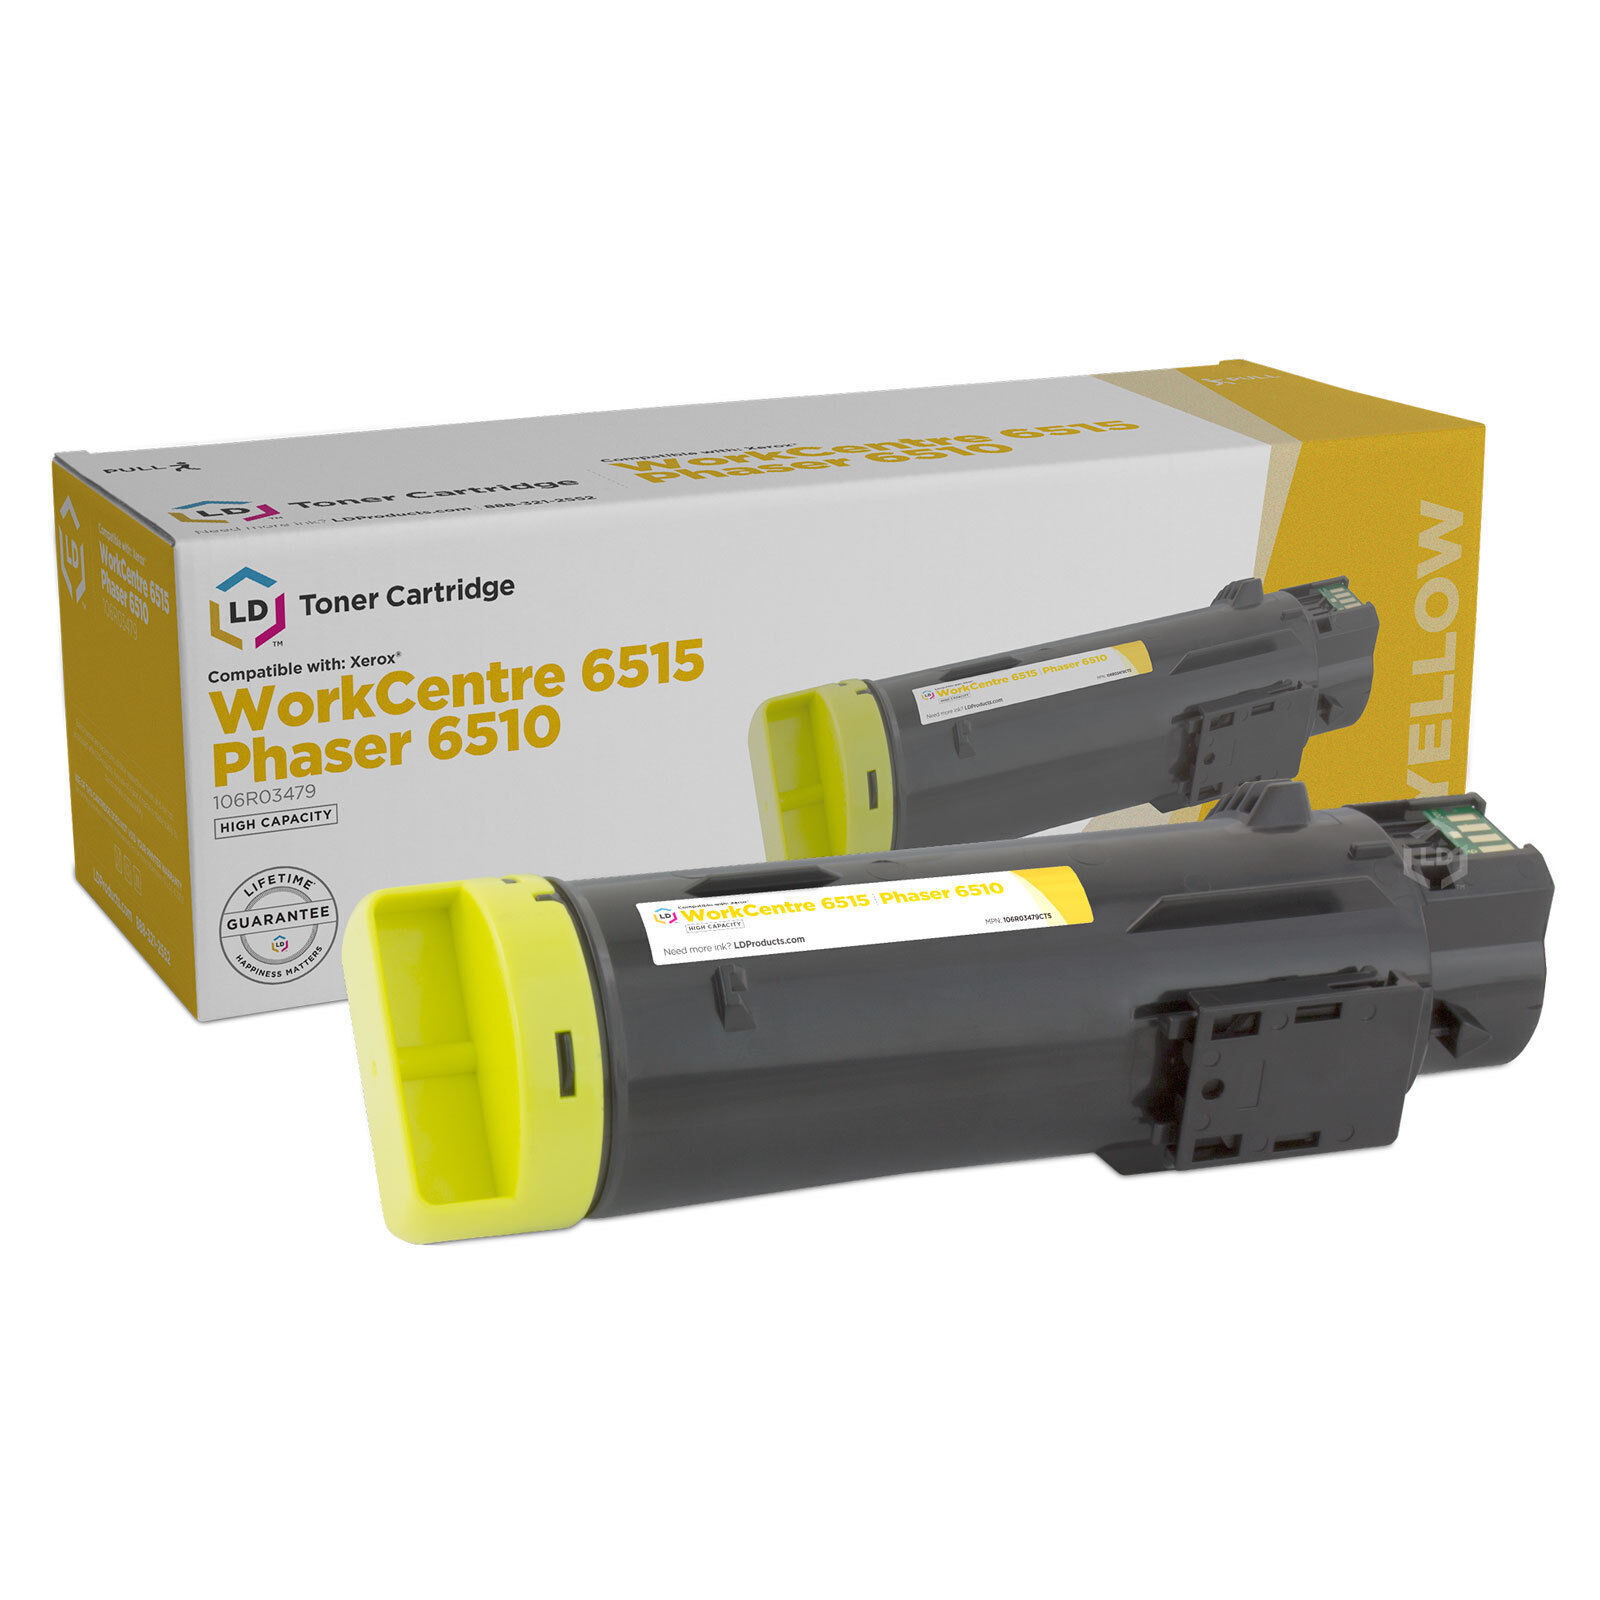 LD Compatible Xerox 106R03479 HY Yellow Toner for Phaser 6515 & WorkCentre 6515